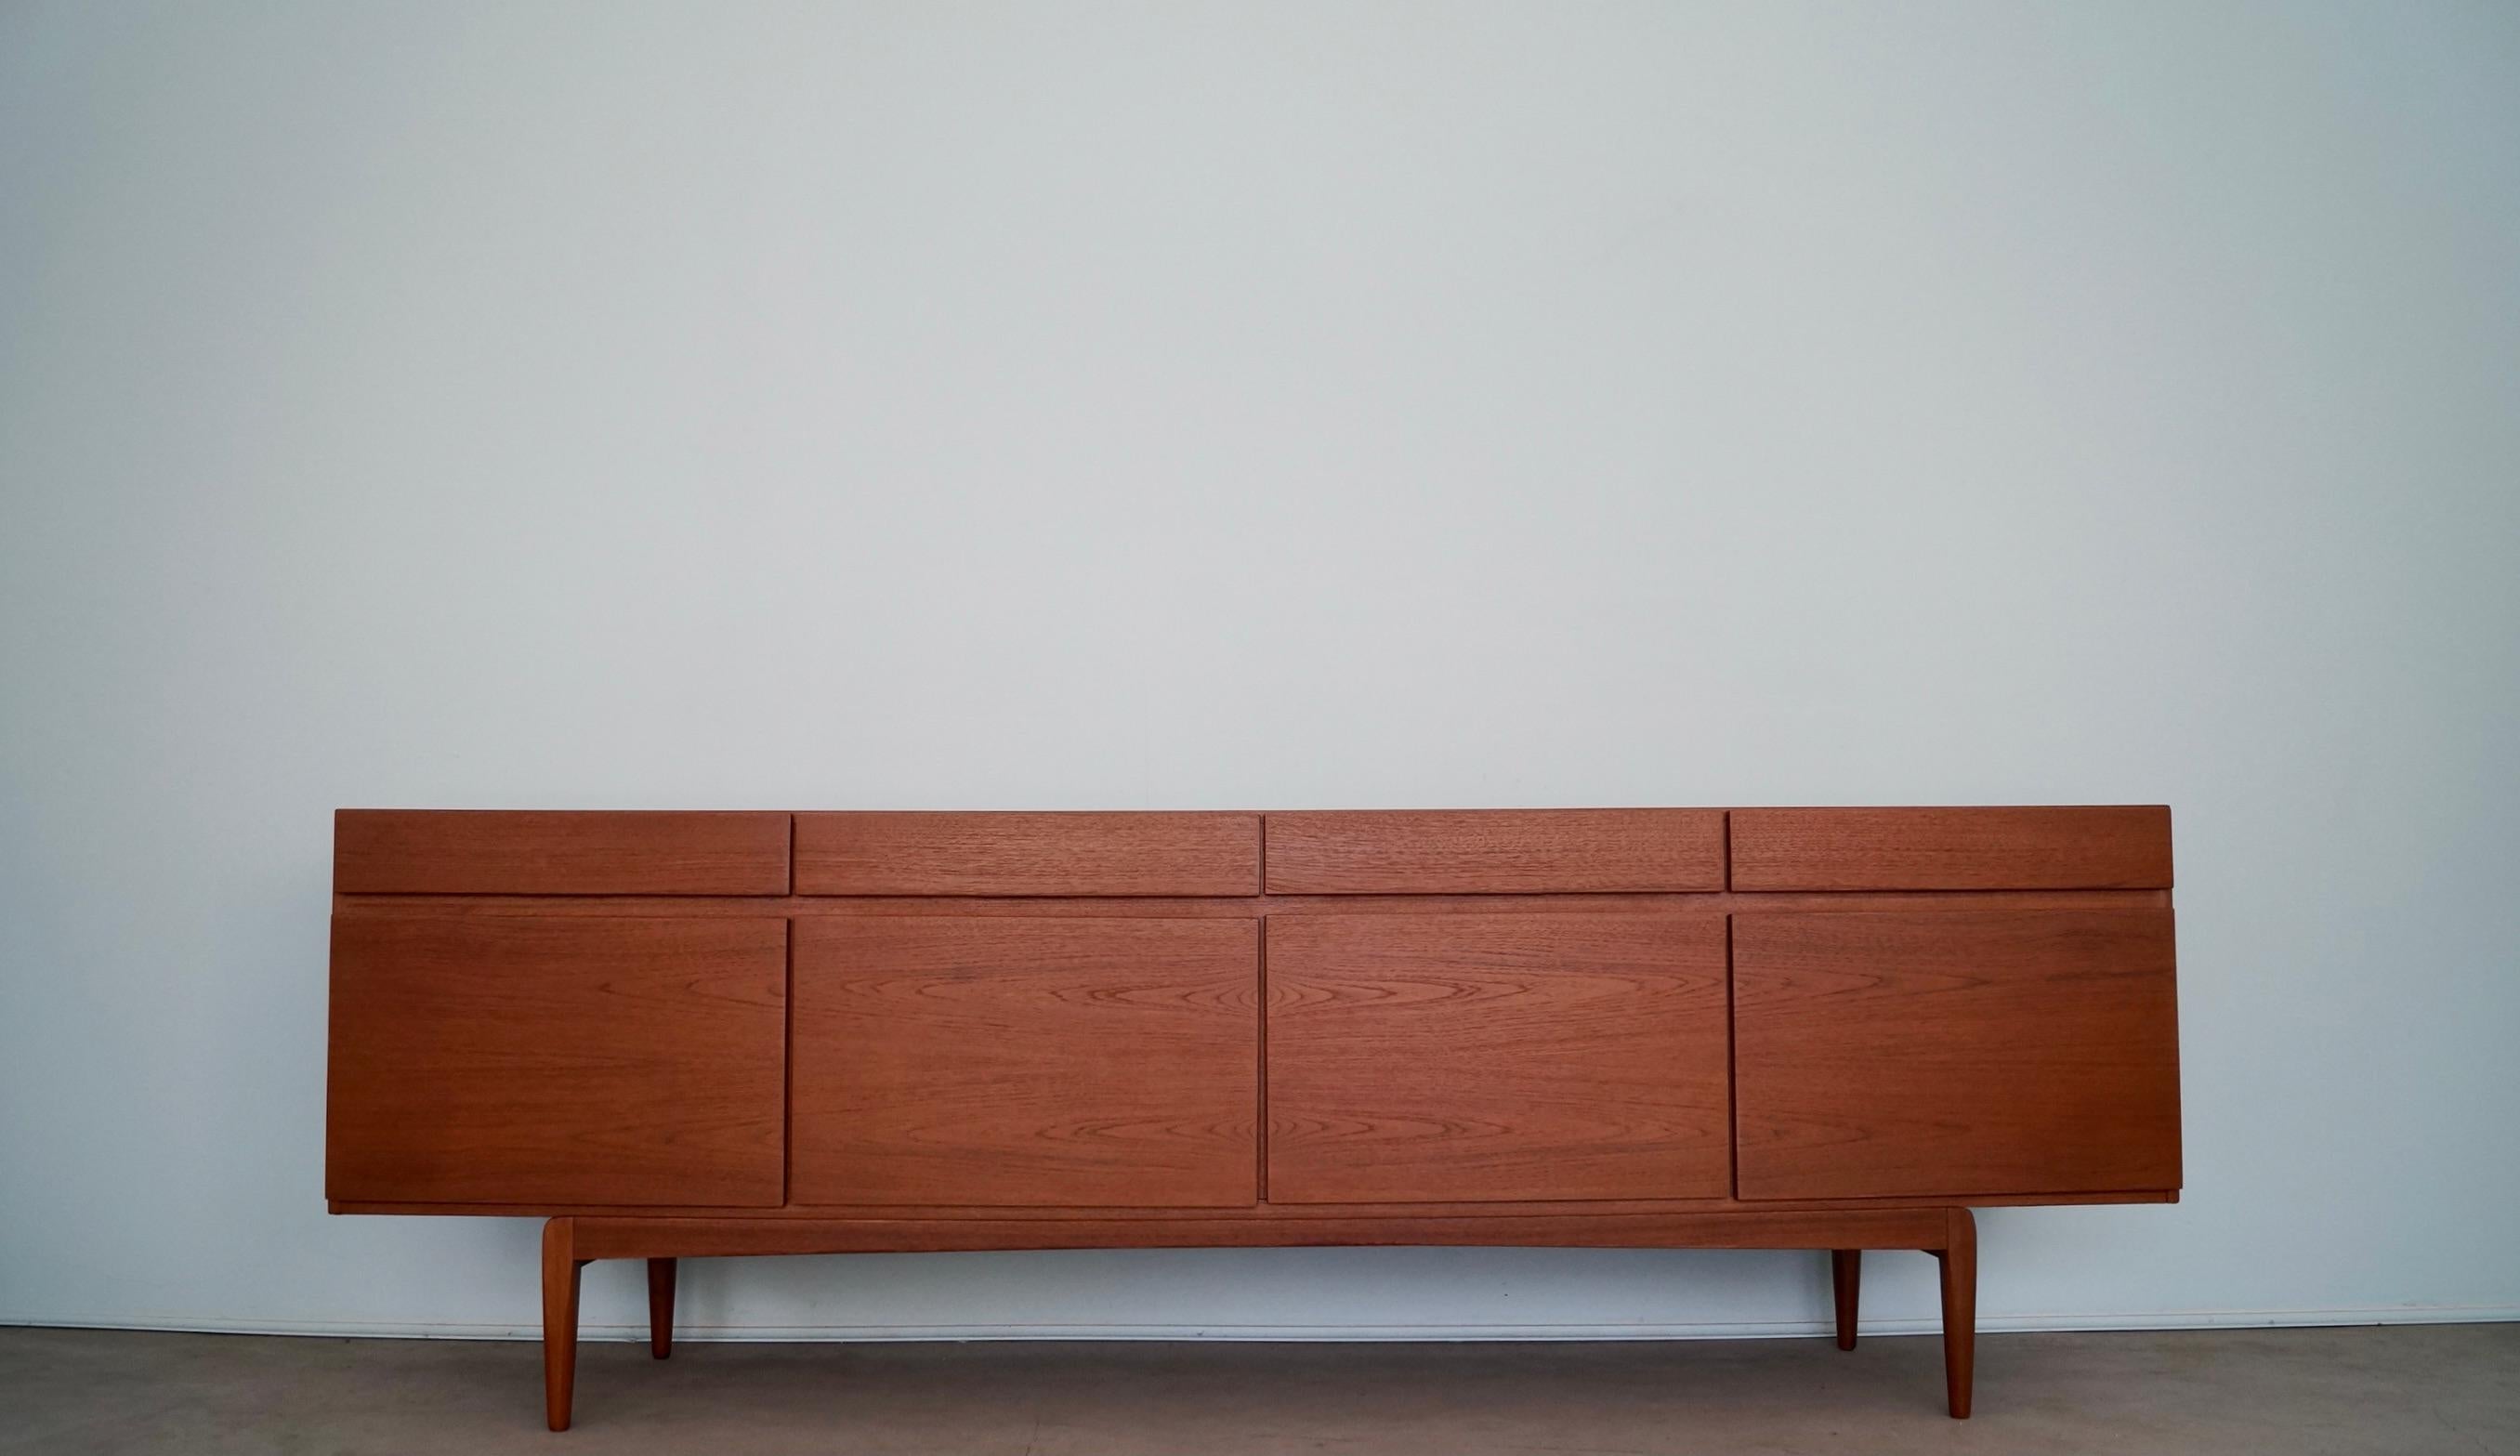 Original Mid-century Danish Modern credenza for sale. It was designed by IB Kofod-Larsen in the 1960's, and is a stunning work of art. It was manufactured by Faarup Mobelfabrik, and is an exceptional piece. It's made of teak, and has been